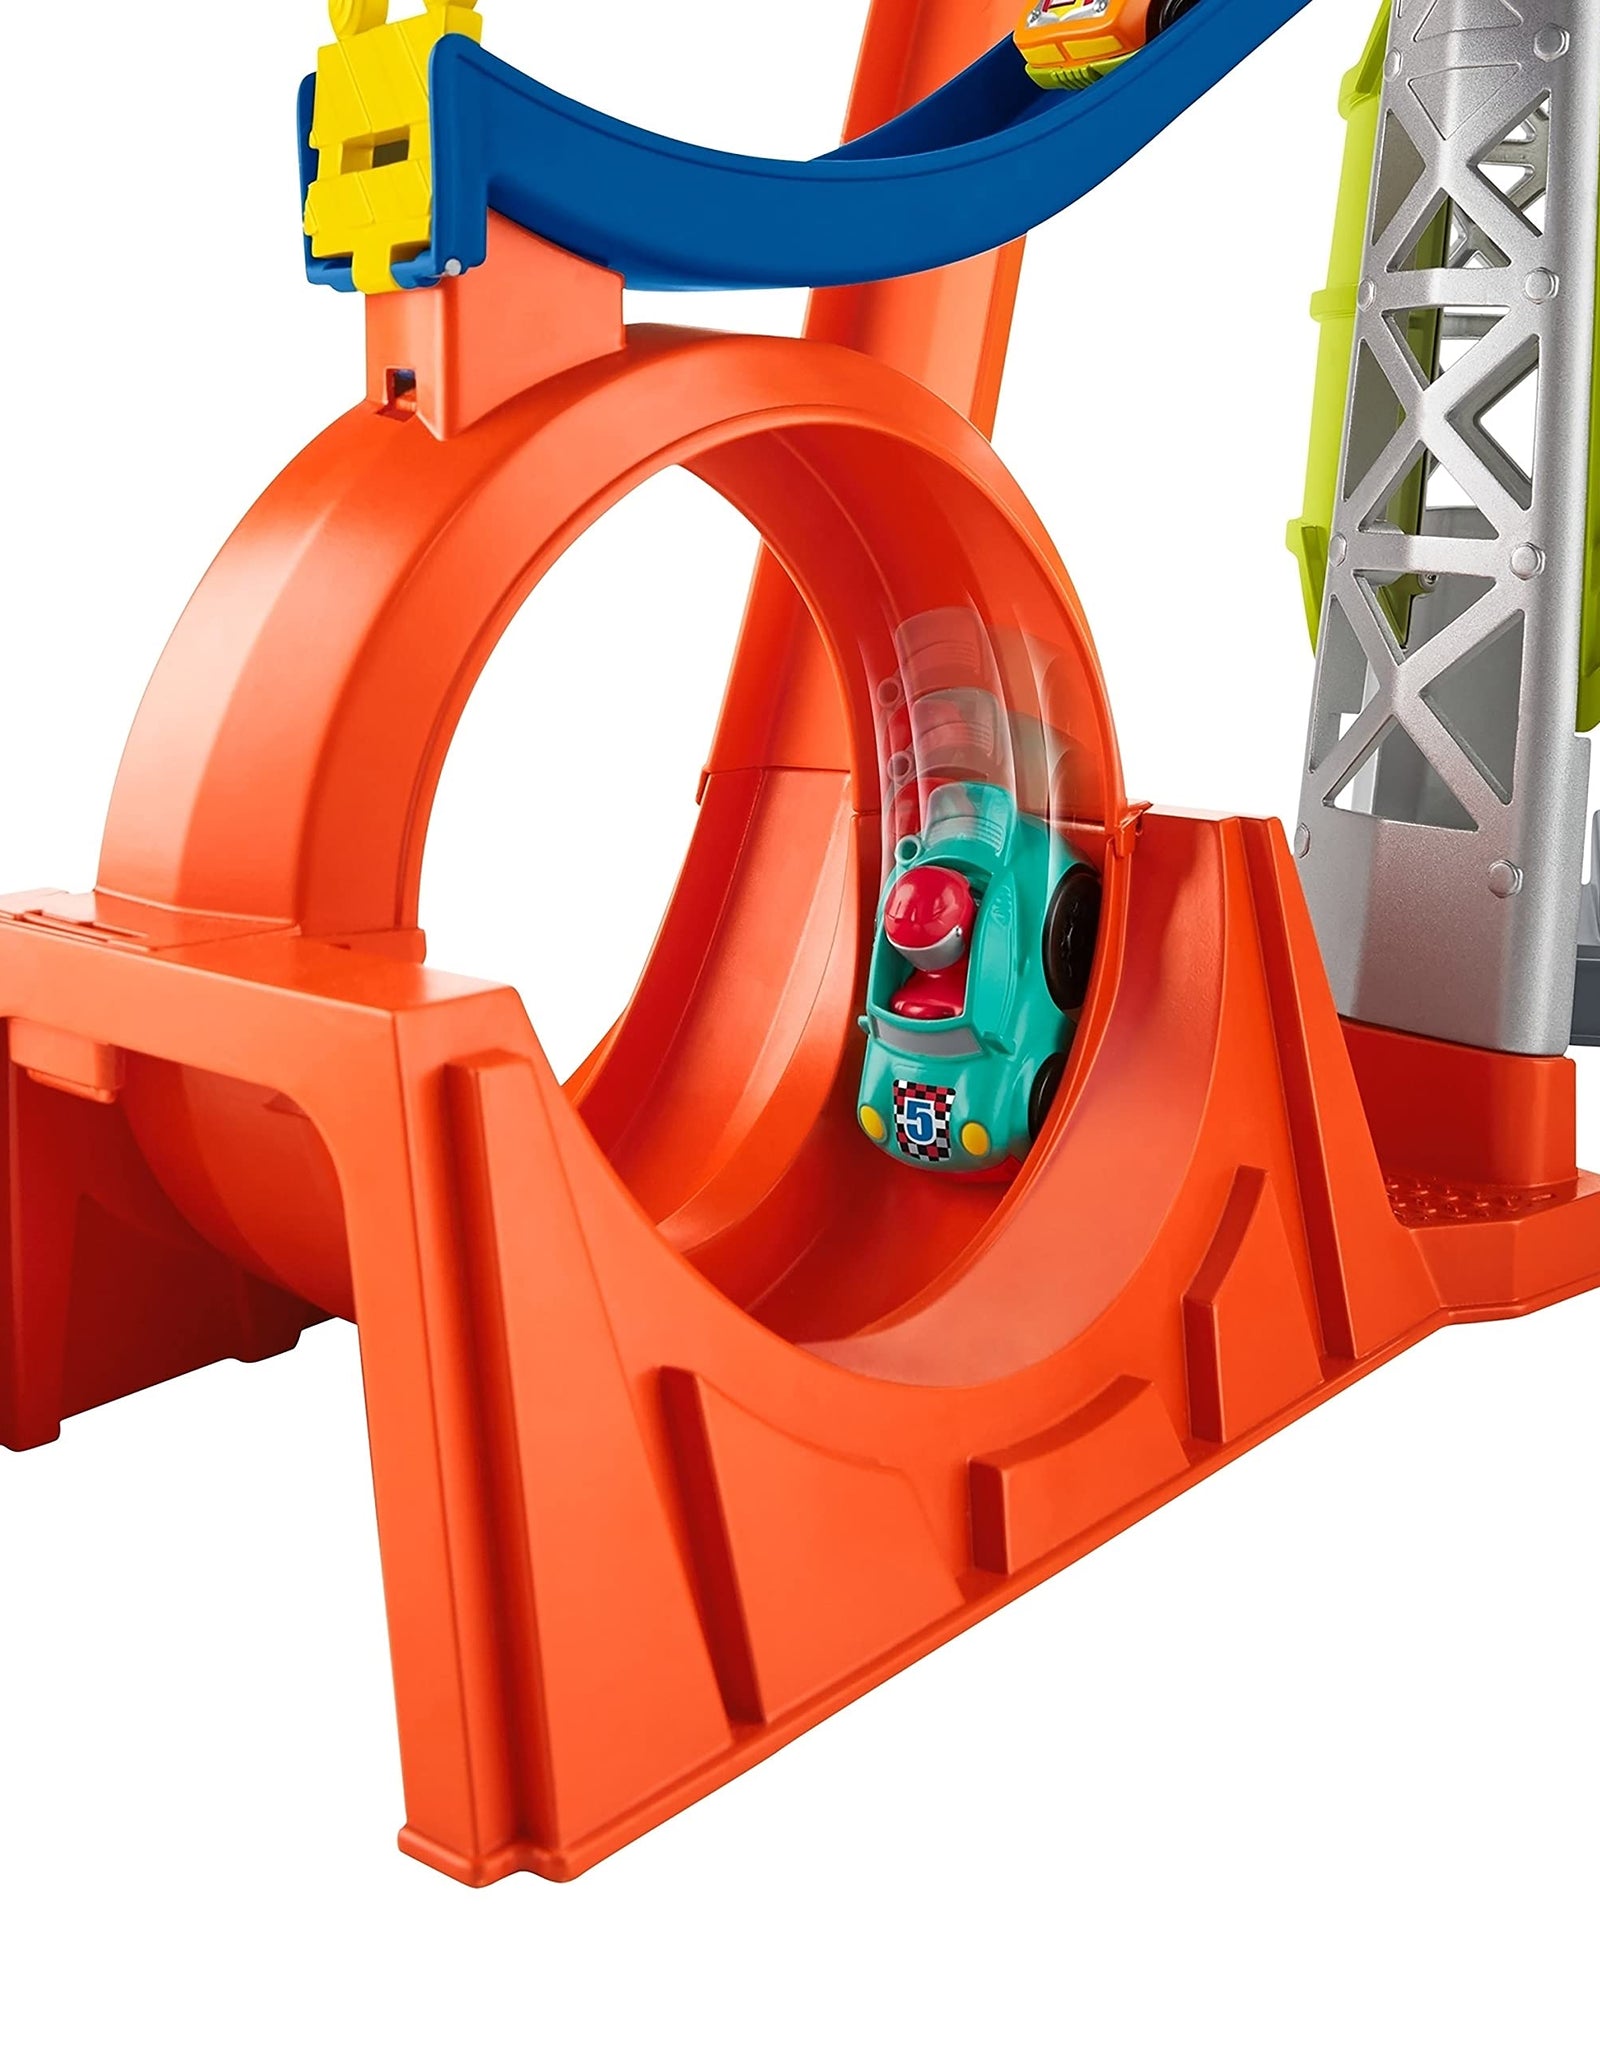 Fisher-Price Little People Launch & Loop Raceway, vehicle playset for toddlers and preschool kids